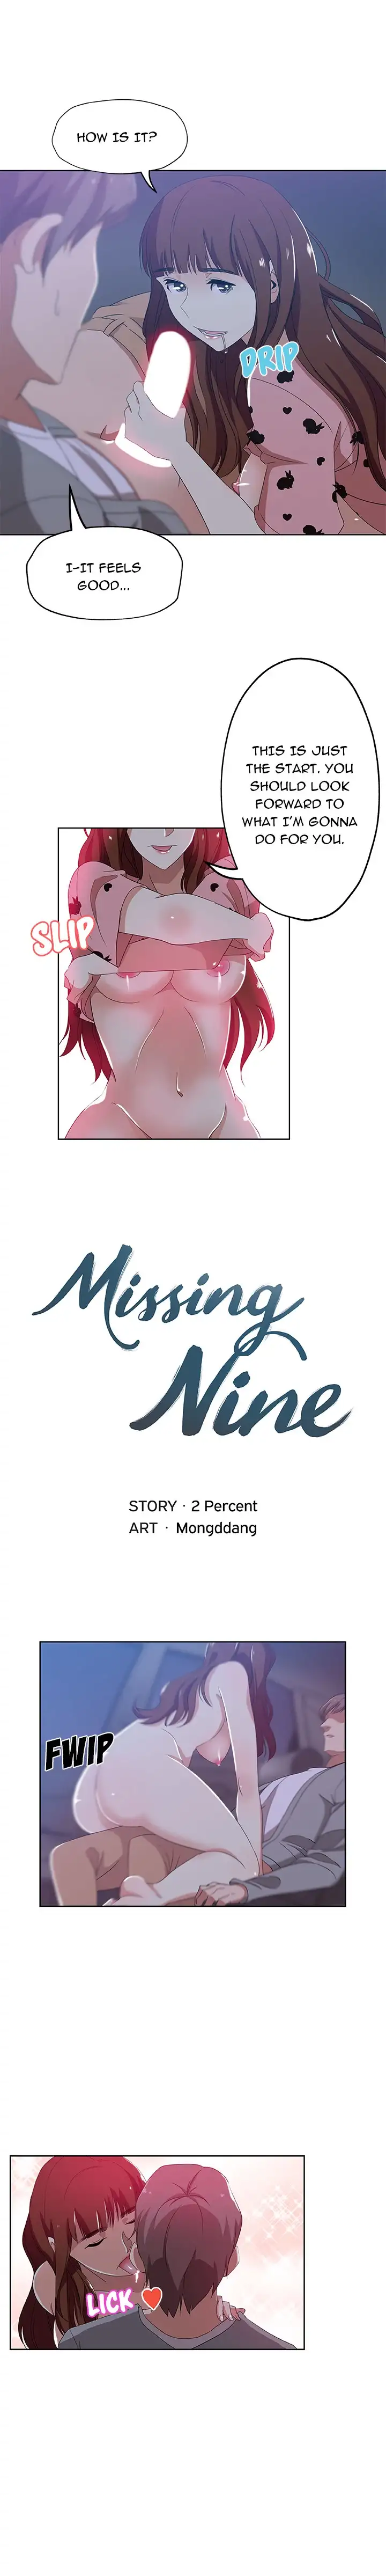 Missing Nine - Chapter 6 Page 3